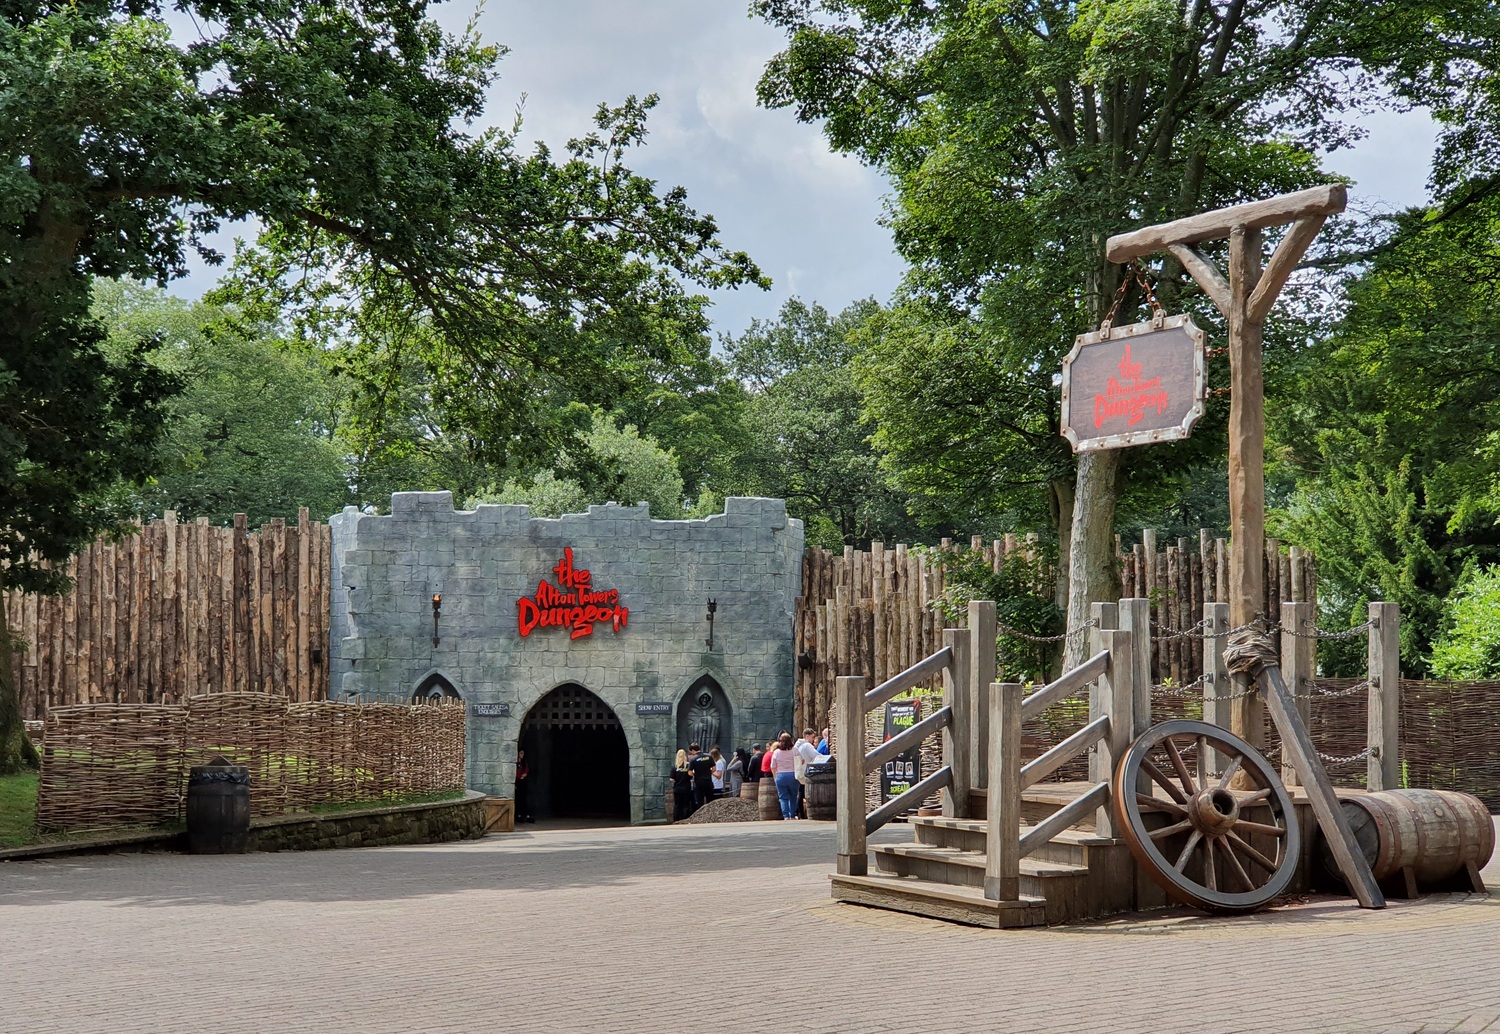 The Alton Towers Dungeon